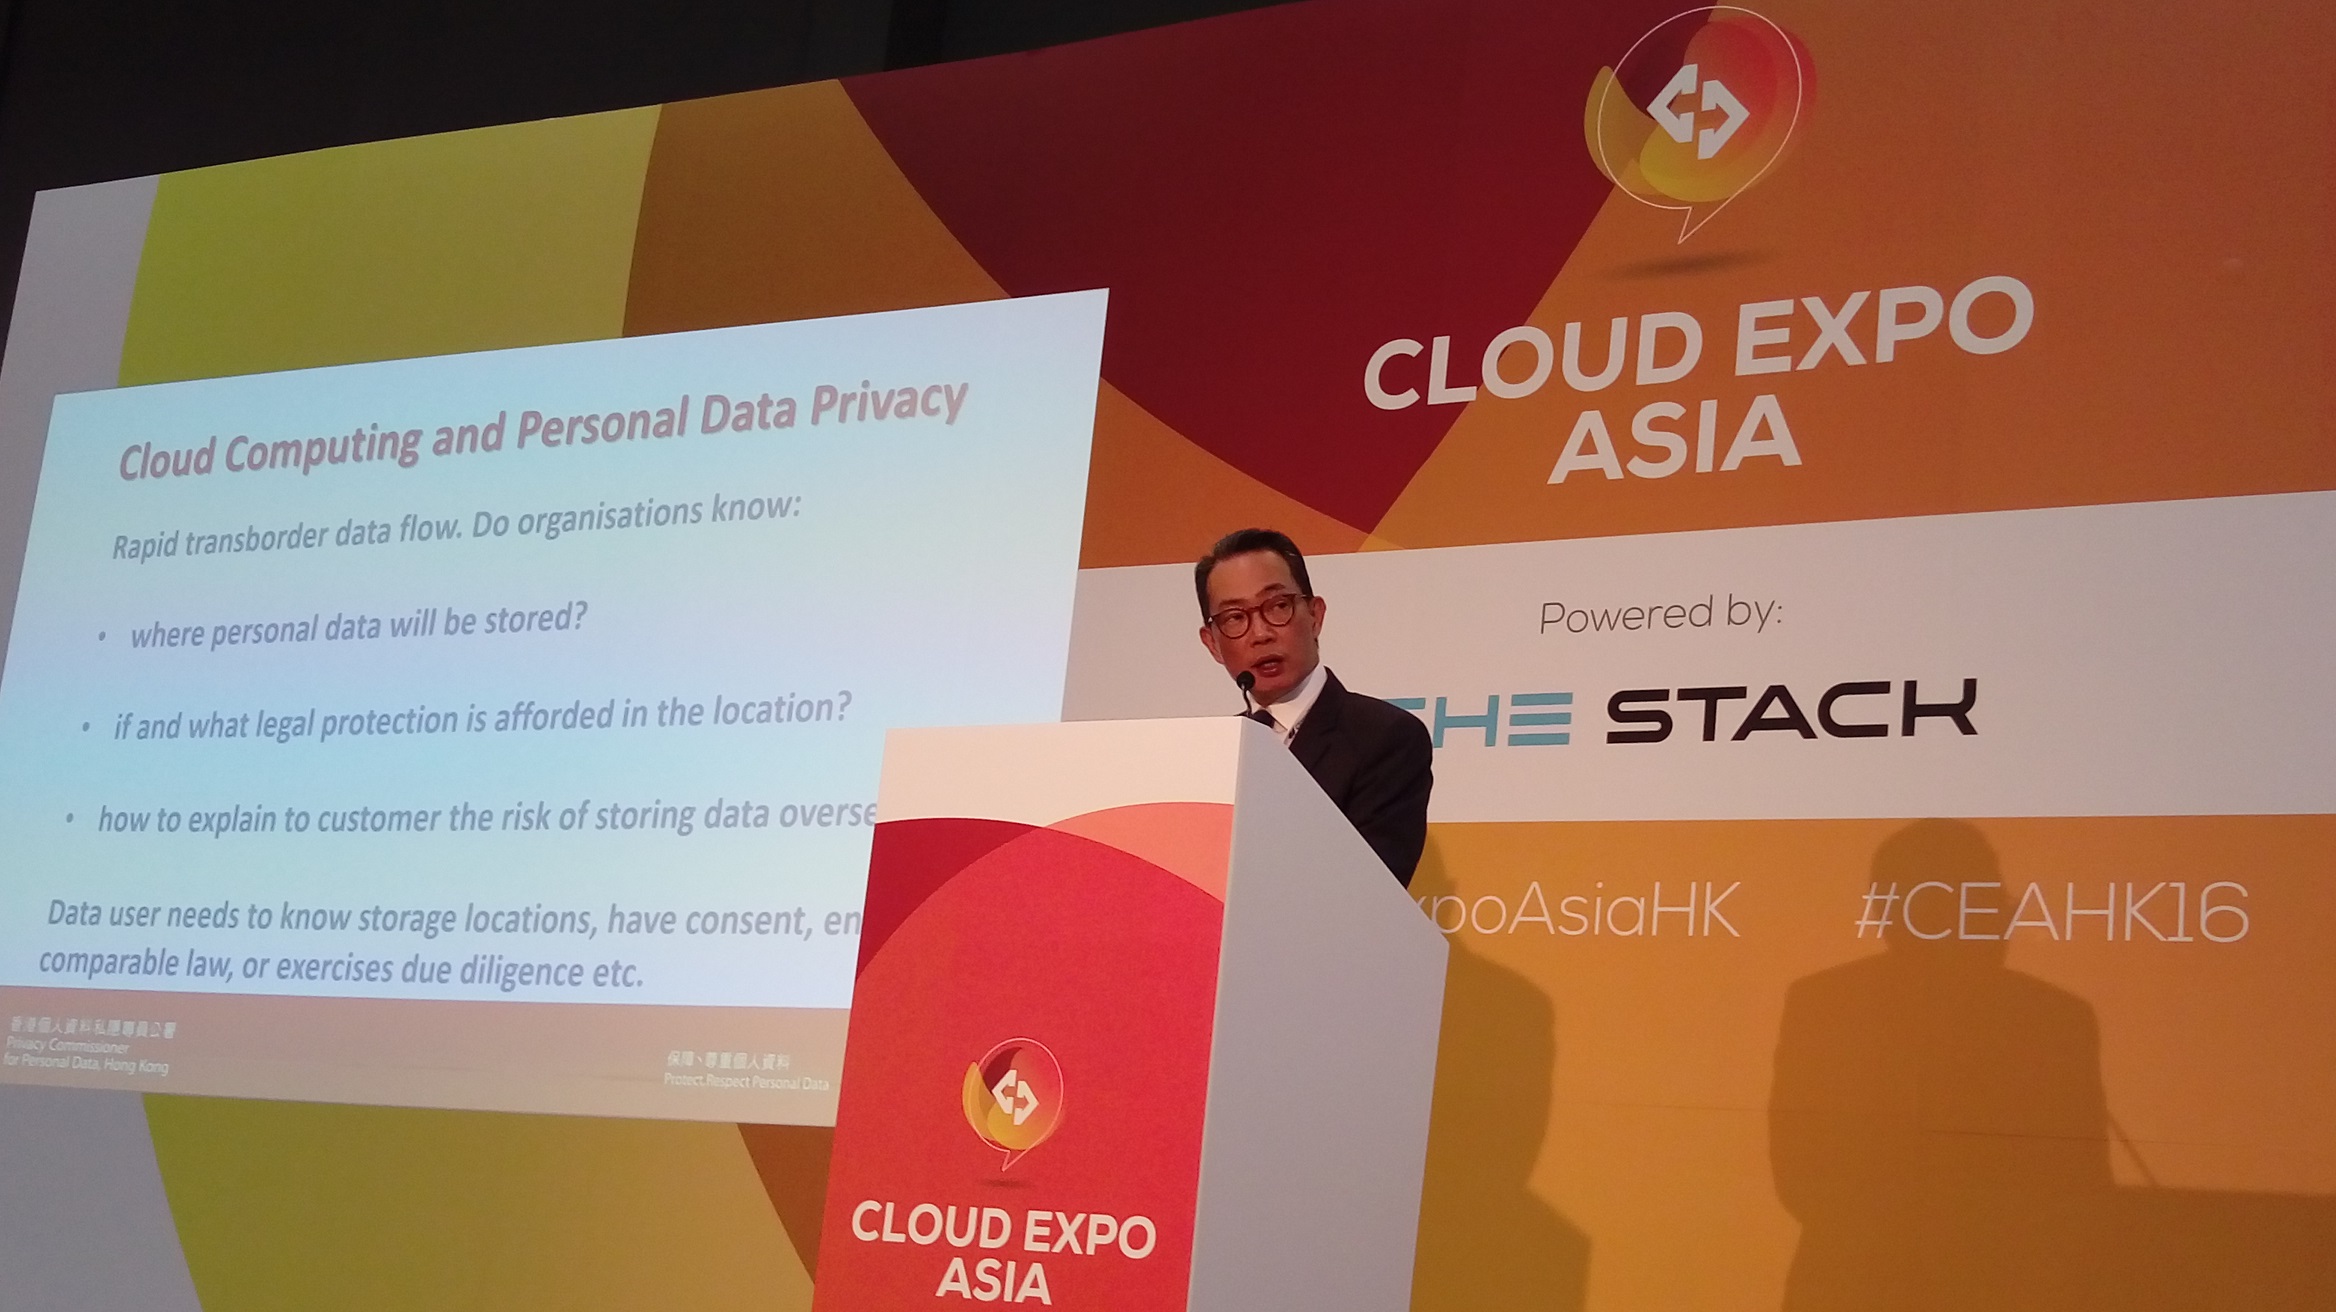 Privacy Commissioner Mr Stephen Wong Attended the Cloud Expo Asia, Held at the AsiaWorld-Expo